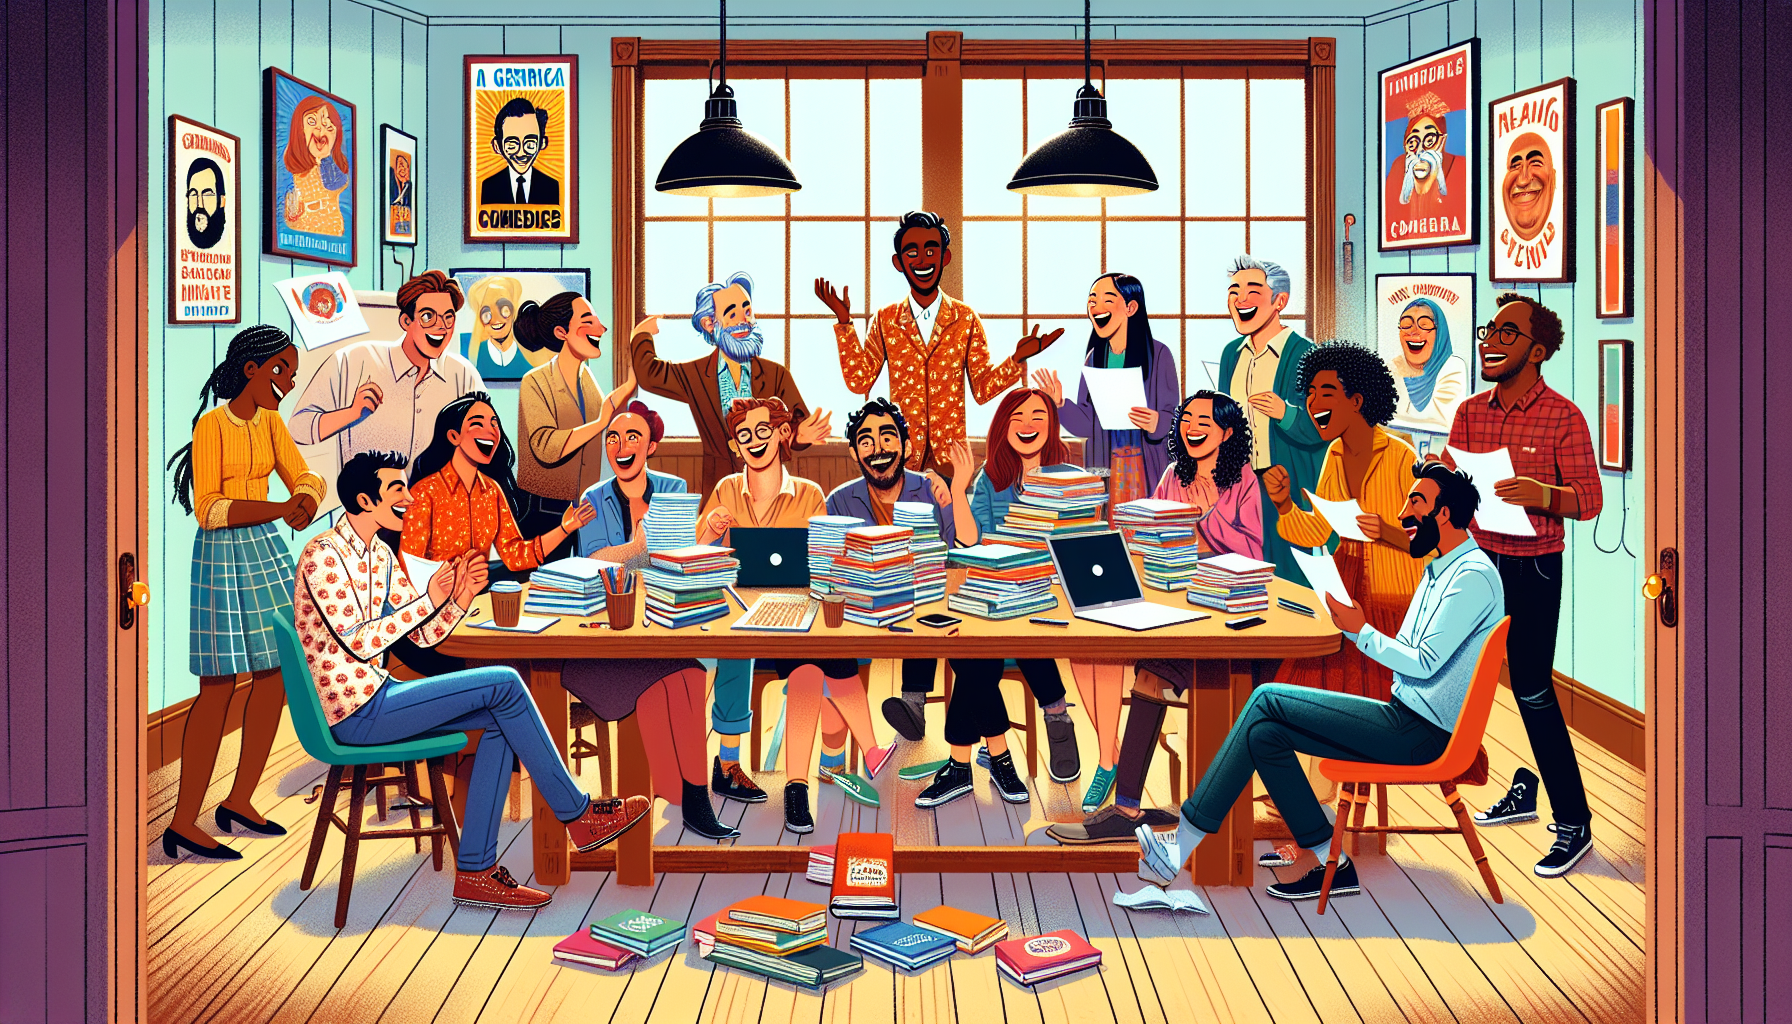 A vibrant, whimsical illustration of a diverse group of people sitting around a large, wooden table filled with papers and laptops, laughing and brainstorming together in a cozy, book-lined room with